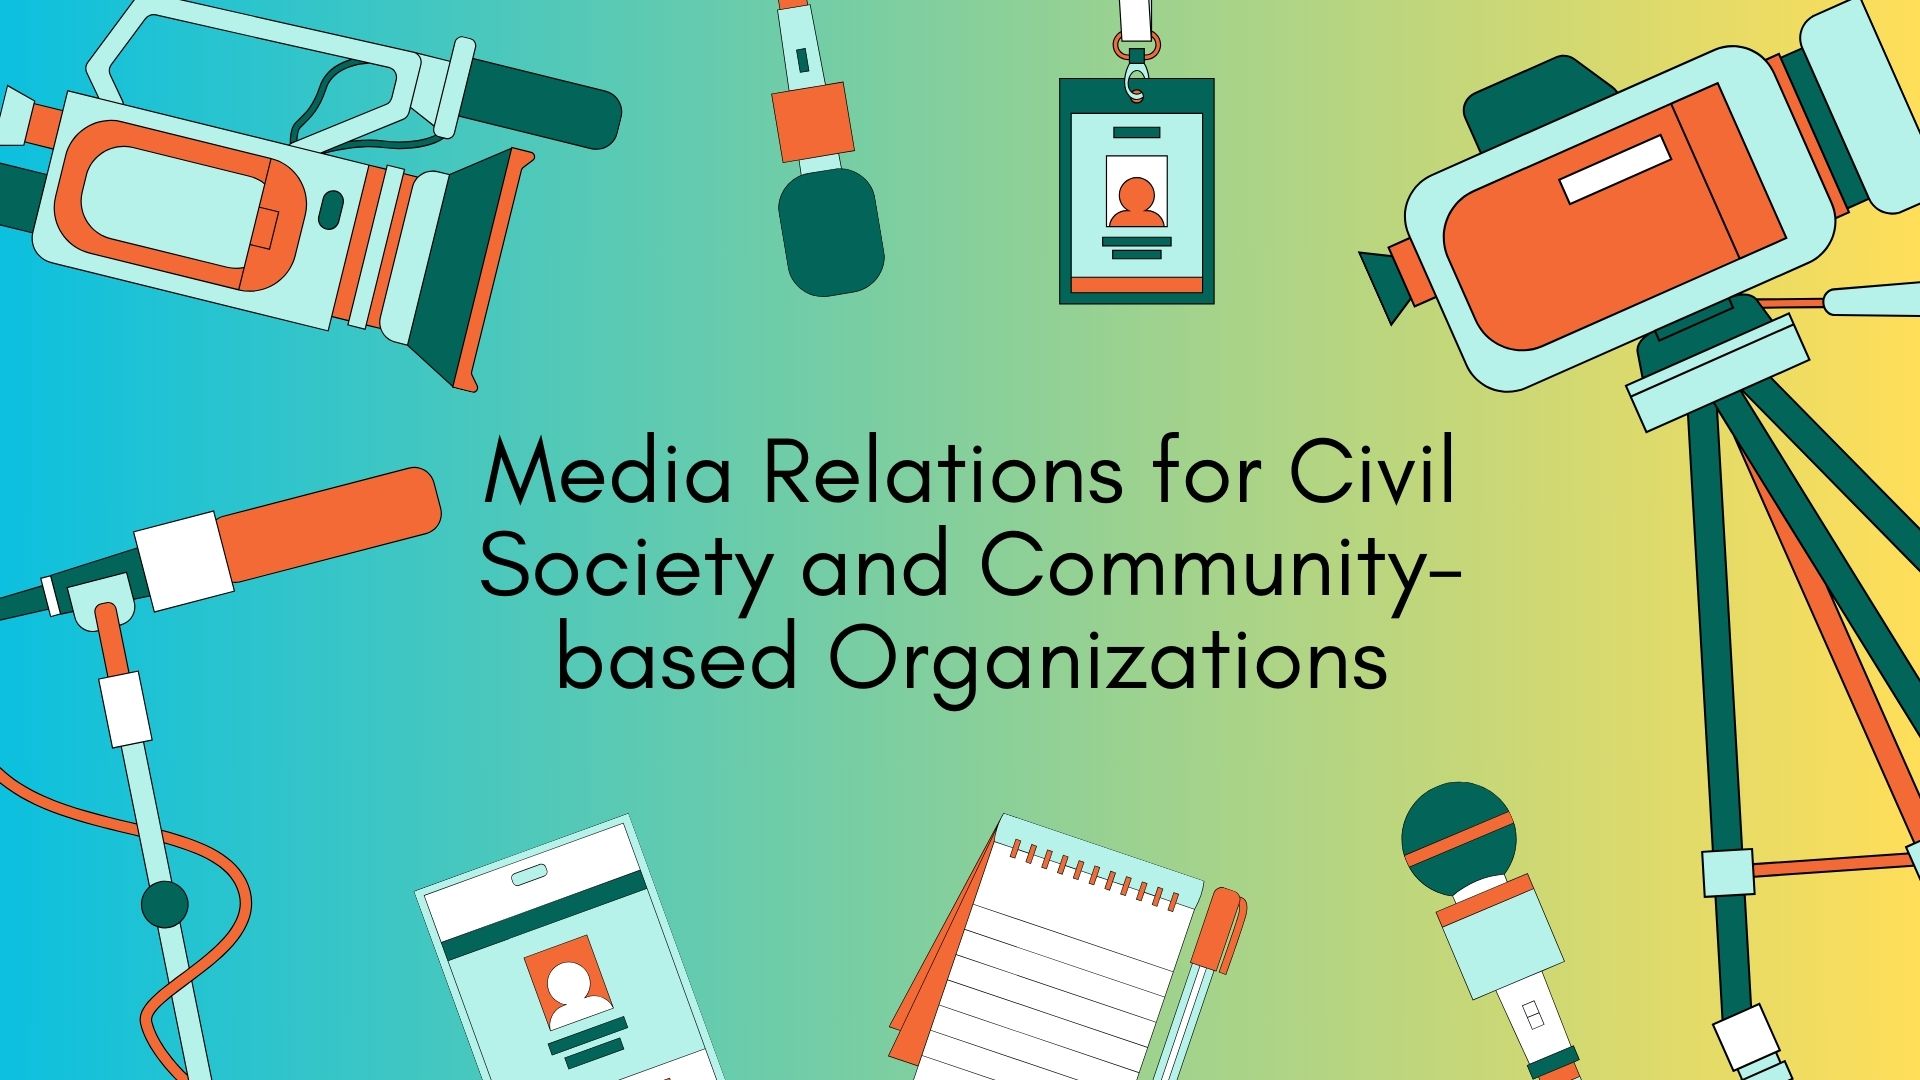 Media Relations for Civil Society and Community-based Organizations